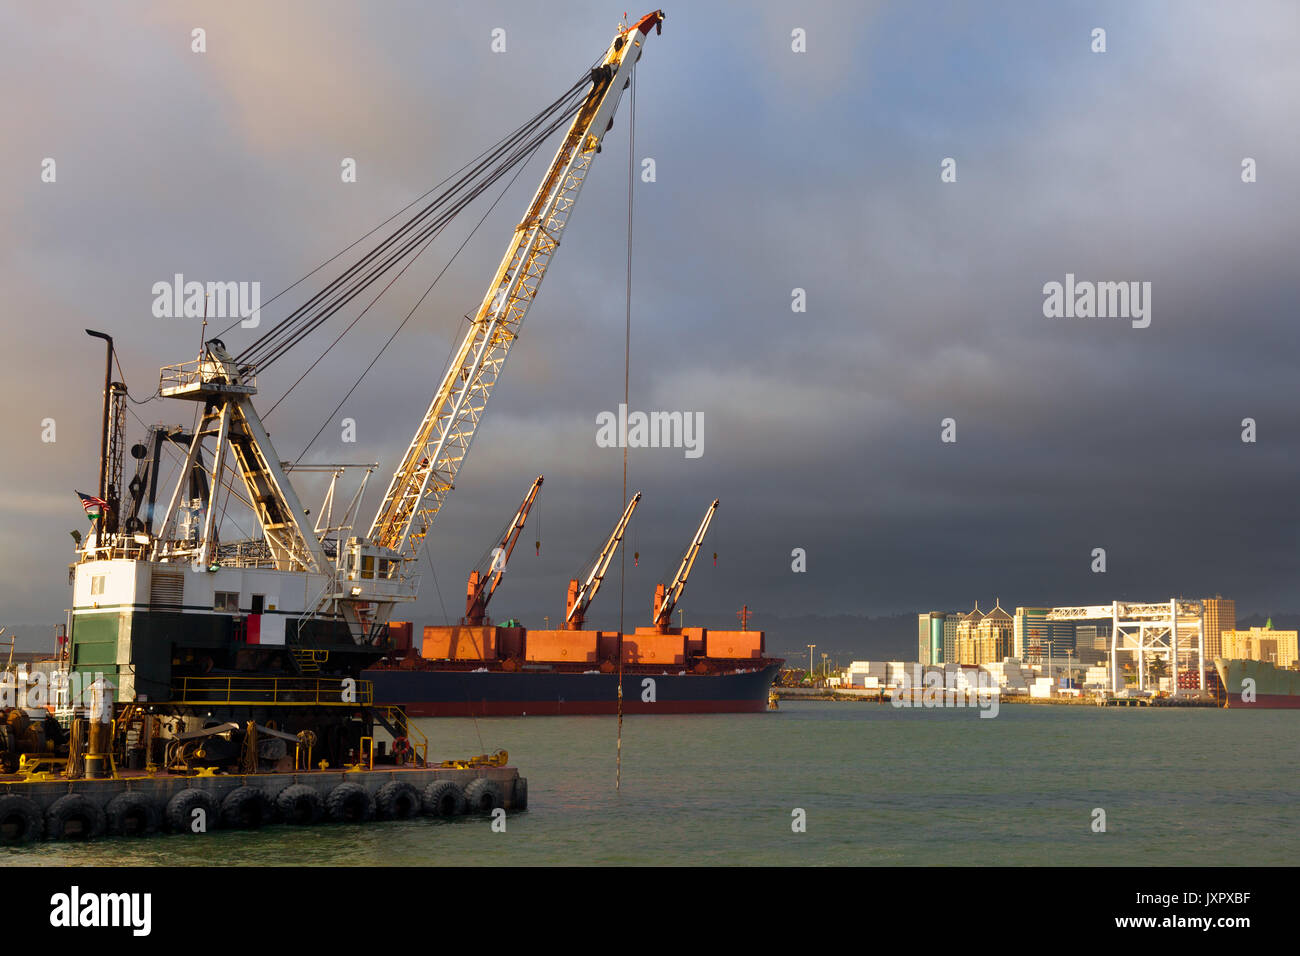 Oakland, California, dredger digging shipping channel for the port Stock Photo